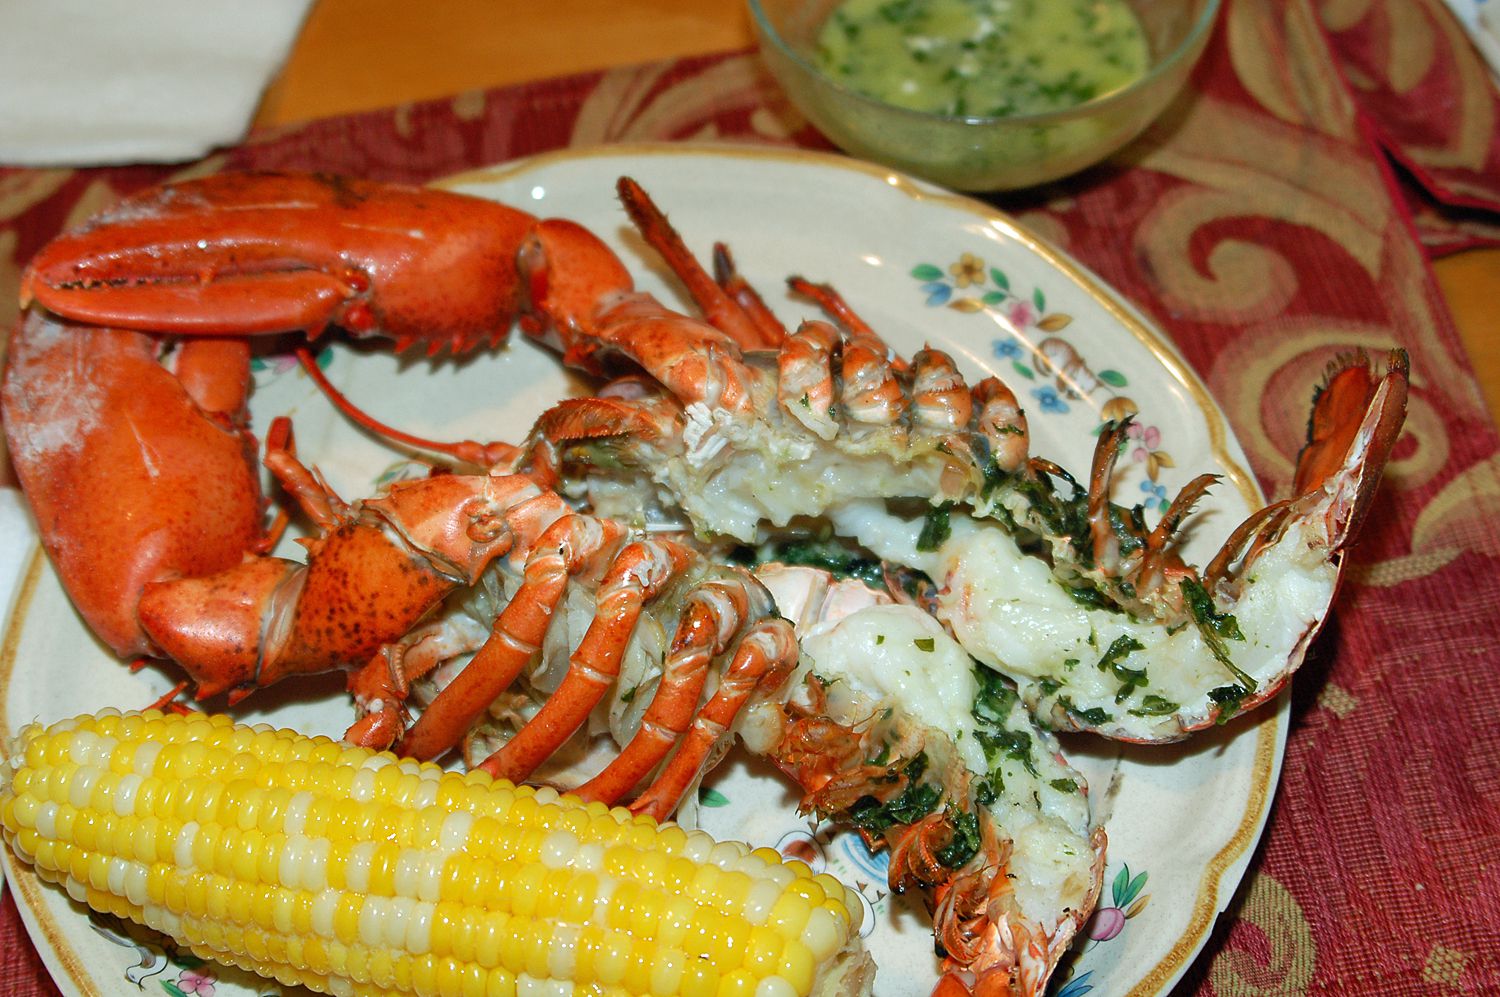 How to Grill Lobster at Home